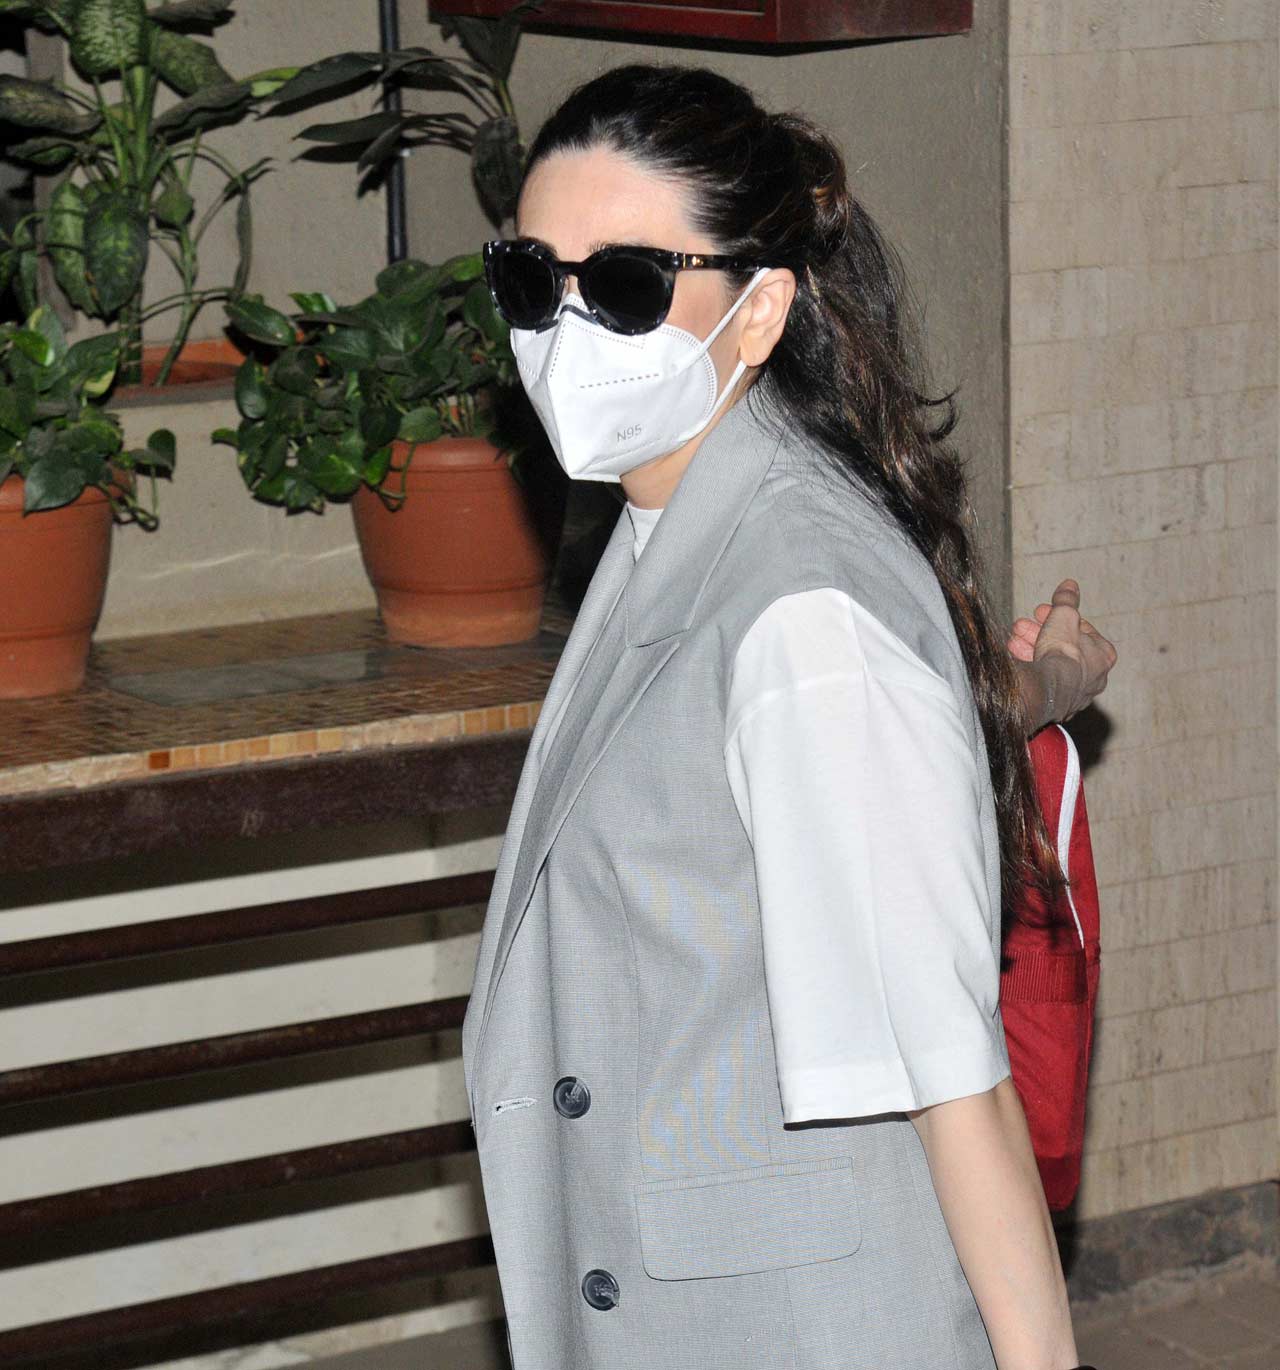 Karisma Kapoor too sported a casual look for her outing.